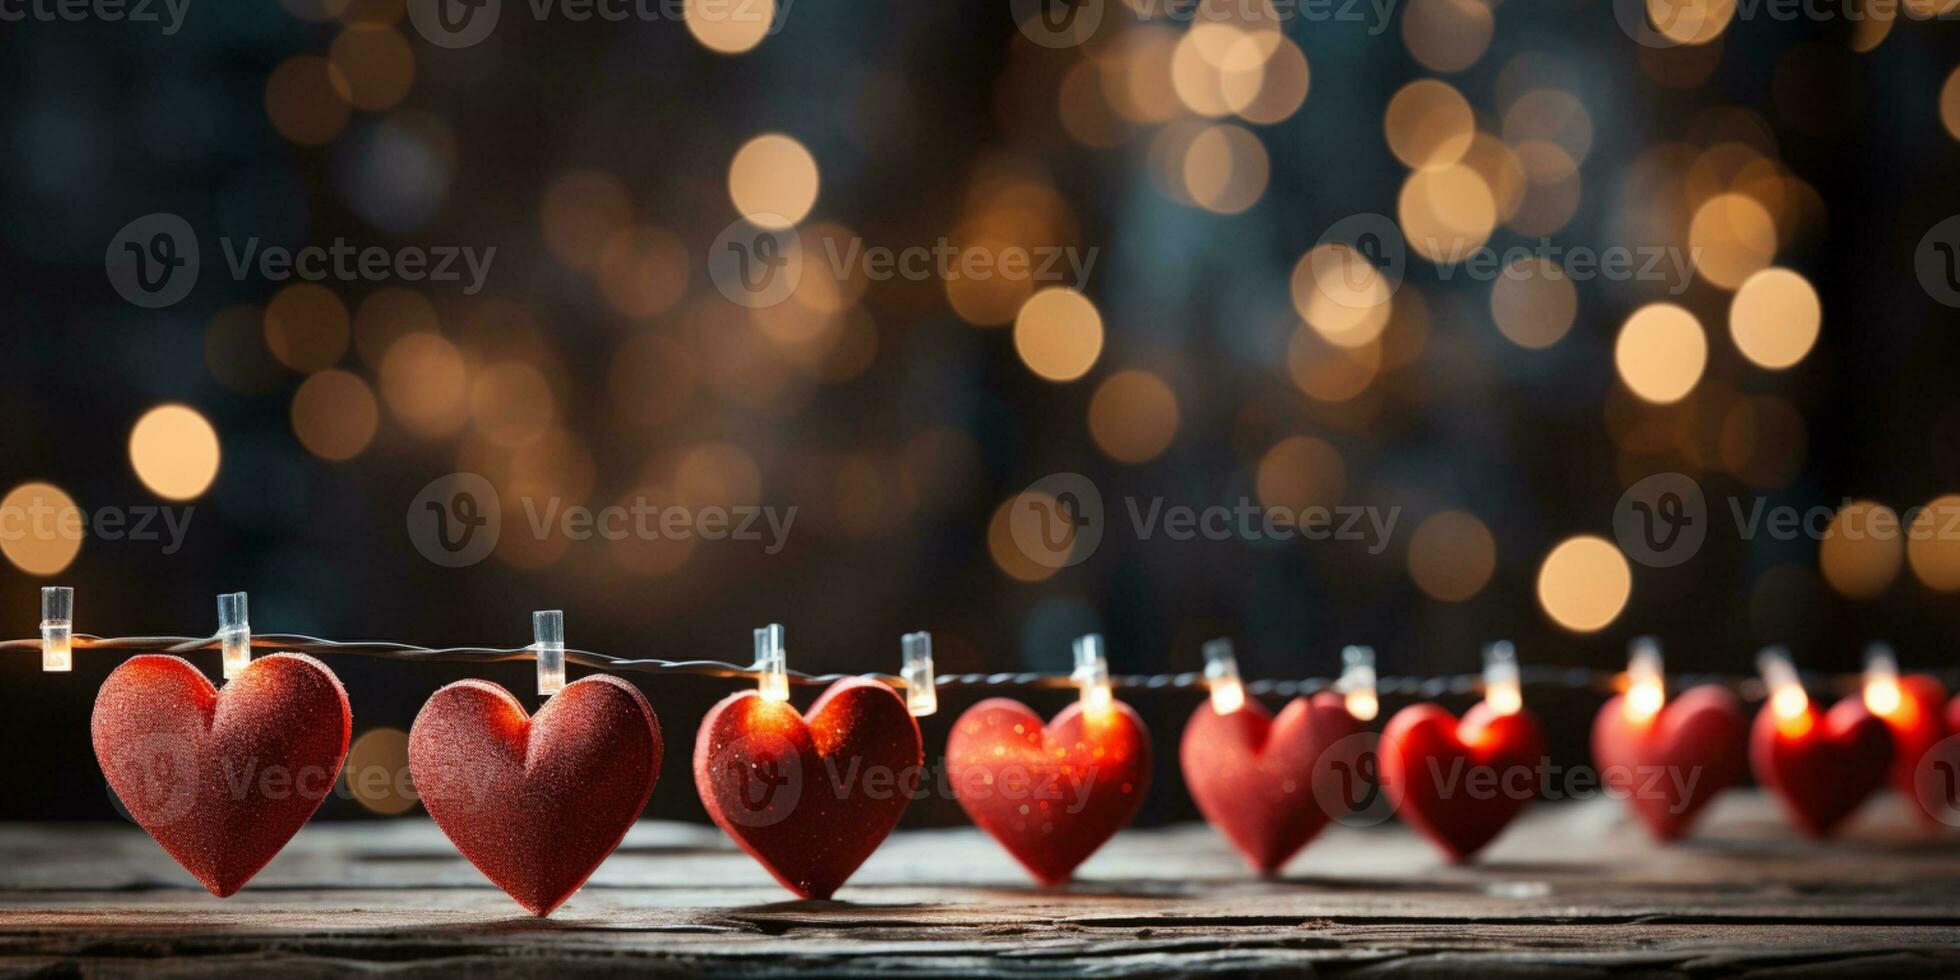 AI generated Happy Valentine's Day Wedding Birthday Background Banner Panoramic Greeting Red Hearts Hanging On Wooden Clothespins Rope With Bokeh Lights On Background photo